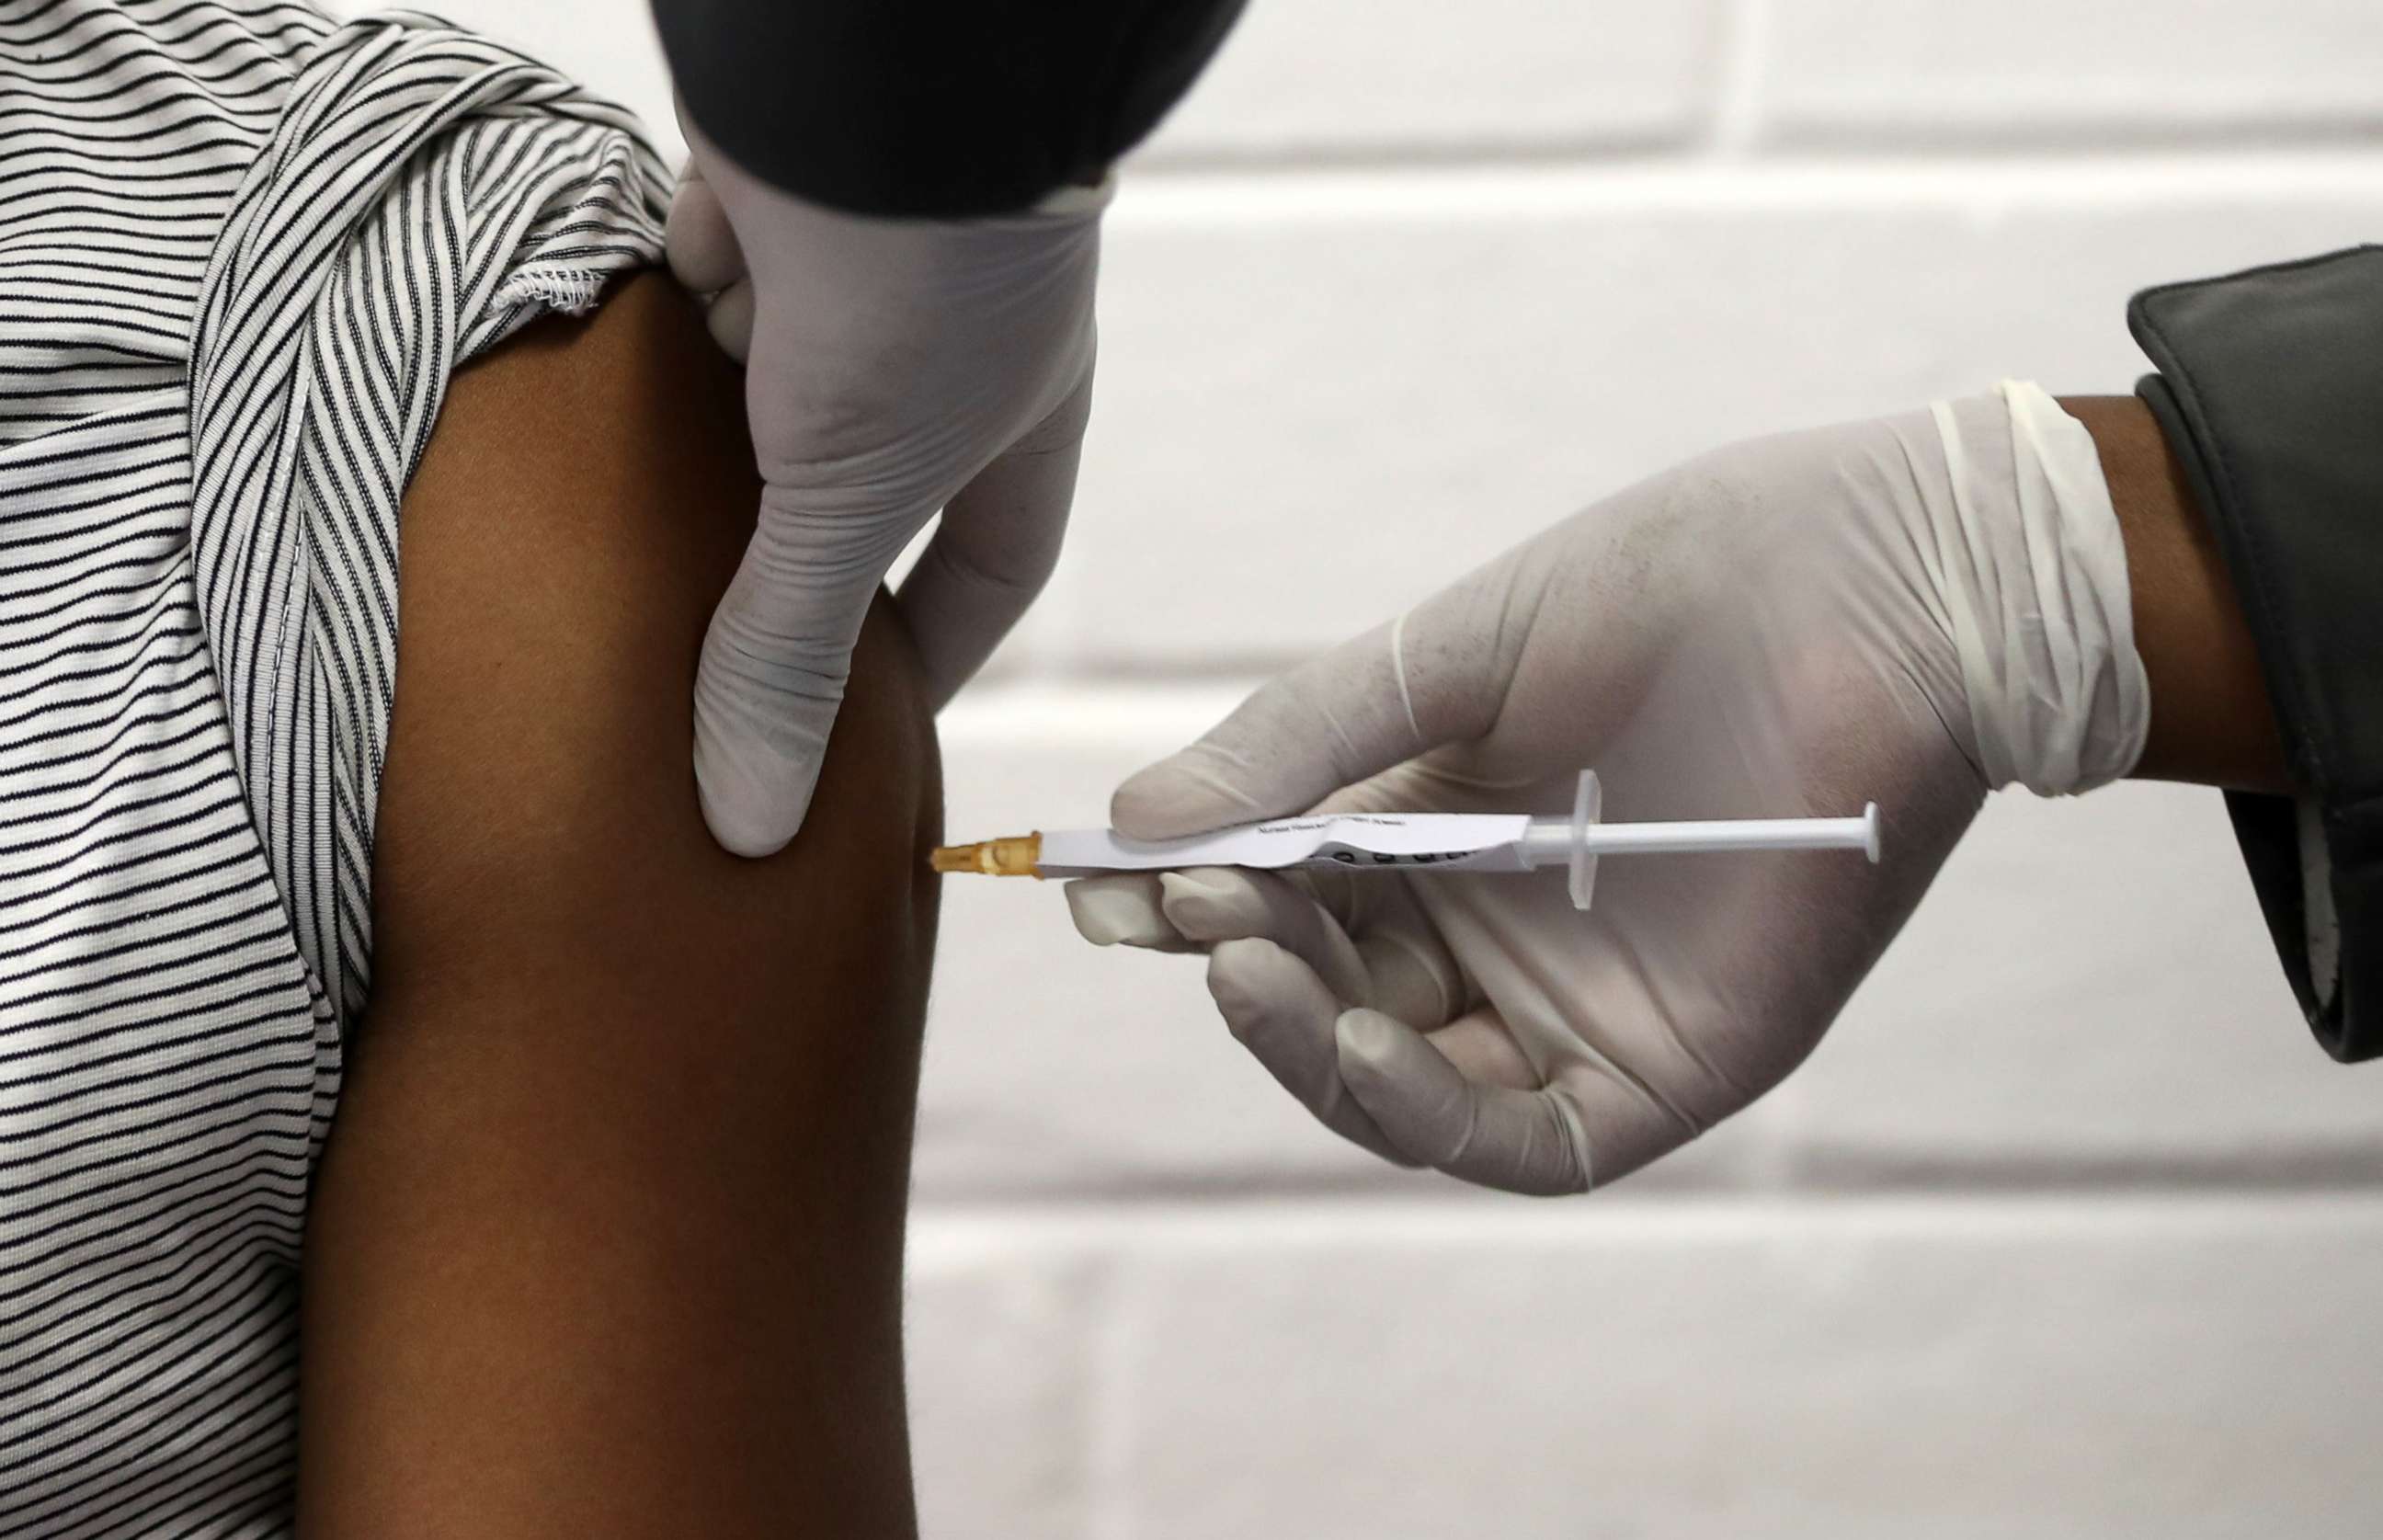 PHOTO: One of the first South African vaccine participants gets injected during the clinical trial for a potential vaccine against the COVID-19 at the Baragwanath hospital in Soweto, South Africa, June 24, 2020.